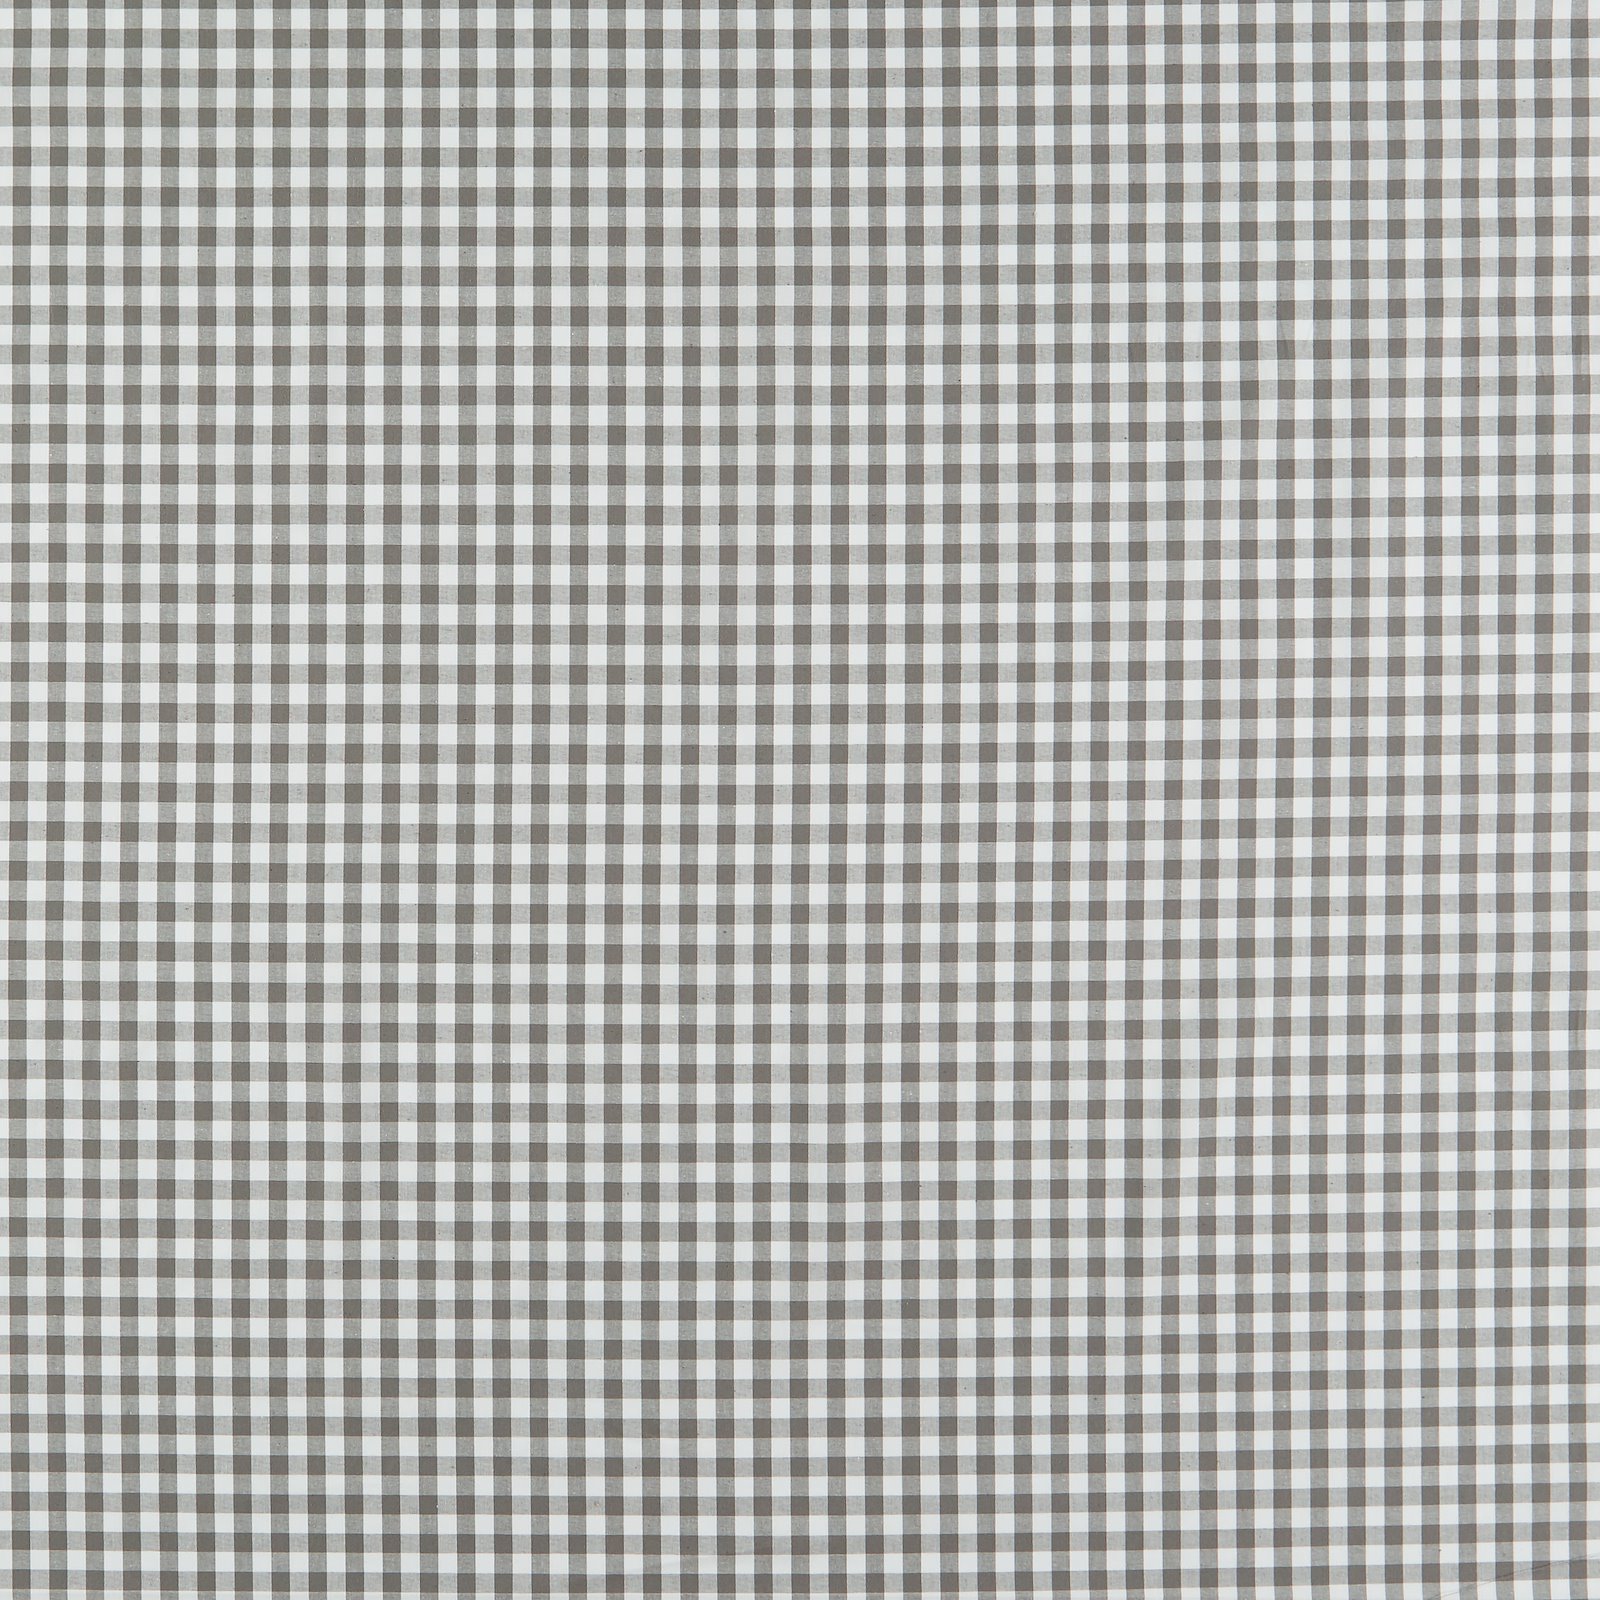 Cotton yarn dyed grey/white check 780886_pack_sp